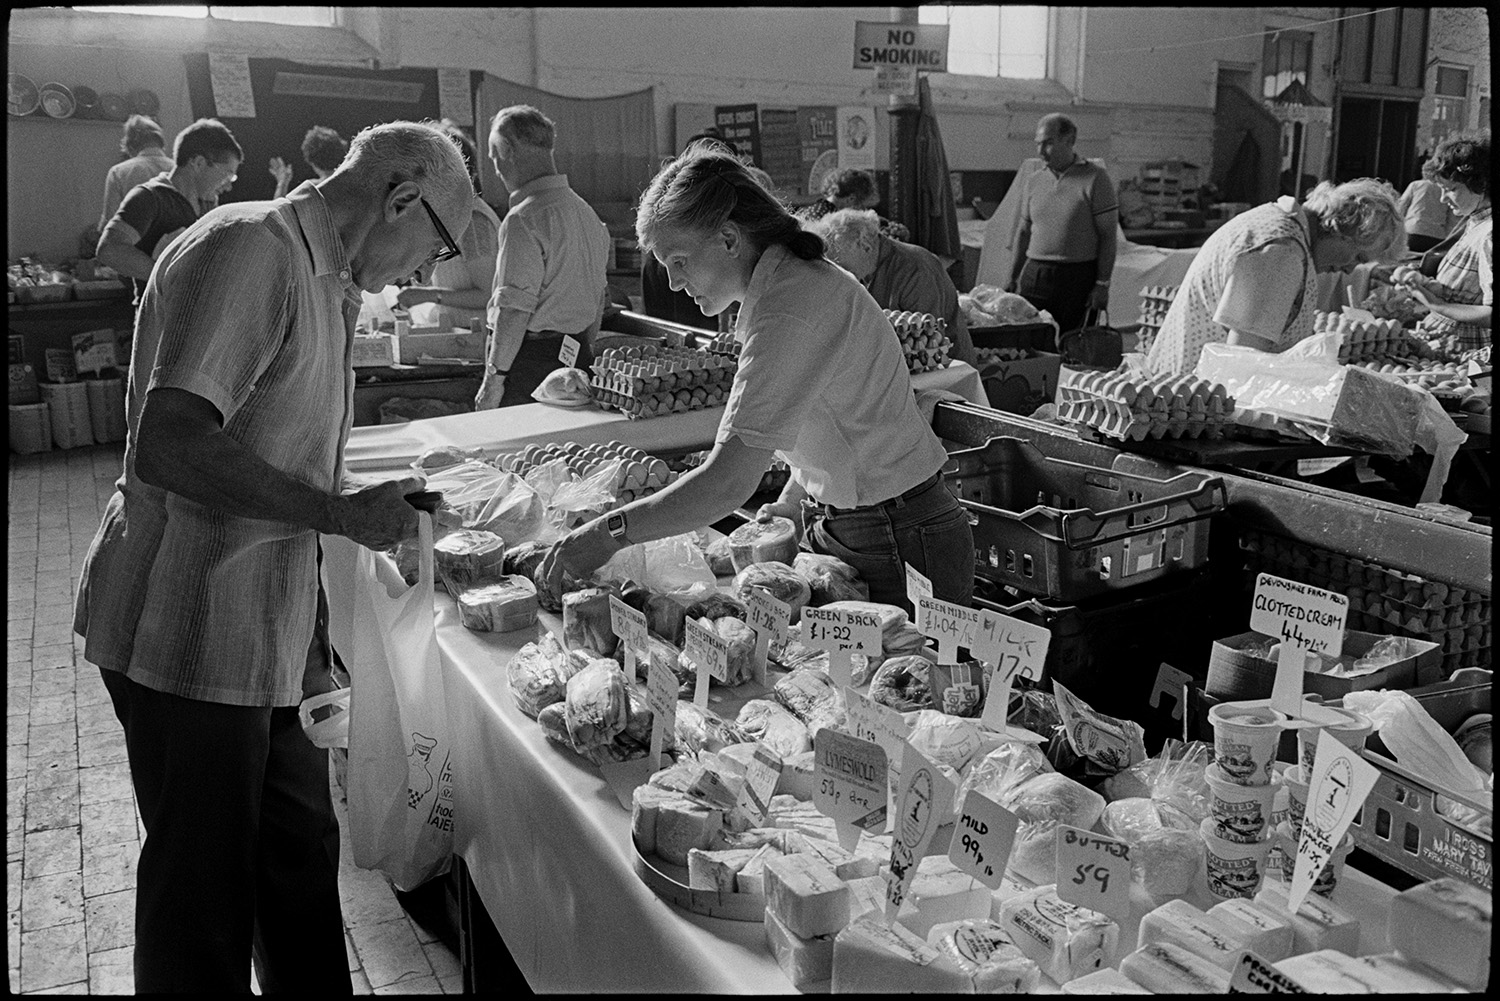 Pannier market stalls, cheese eggs, vegetables, couple setting up stall with eggs in baskets. 
[A man buying cuts of meat from a woman running a stall at Bideford Pannier Market. The stall is also selling cheese and clotted cream. Other stalls, including one selling eggs can be seen in the background.]